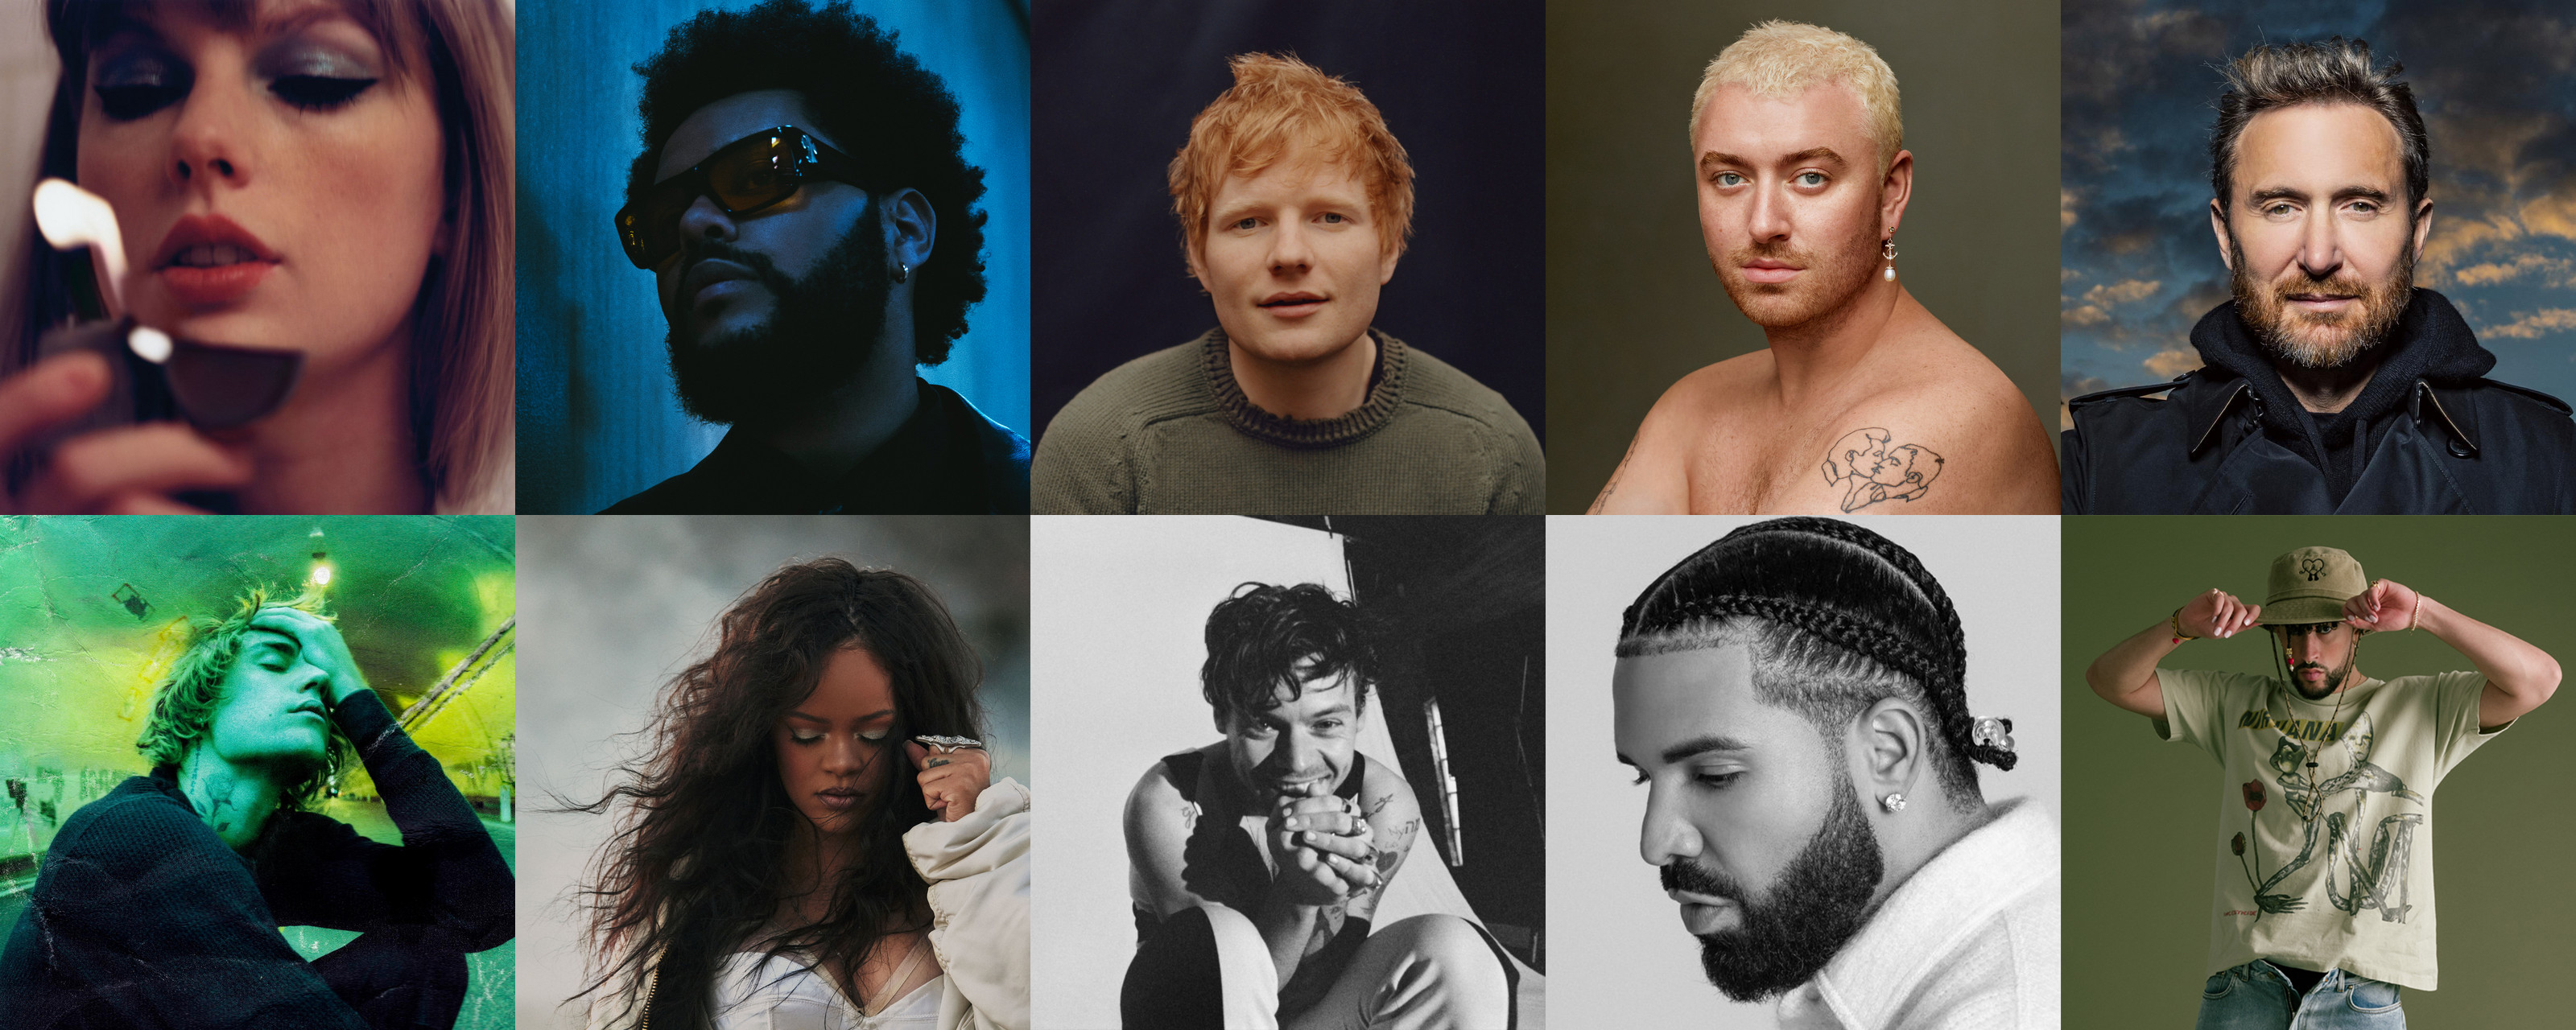 Top 10 most-streamed artists on Spotify – artists with the most monthly listeners in 2022